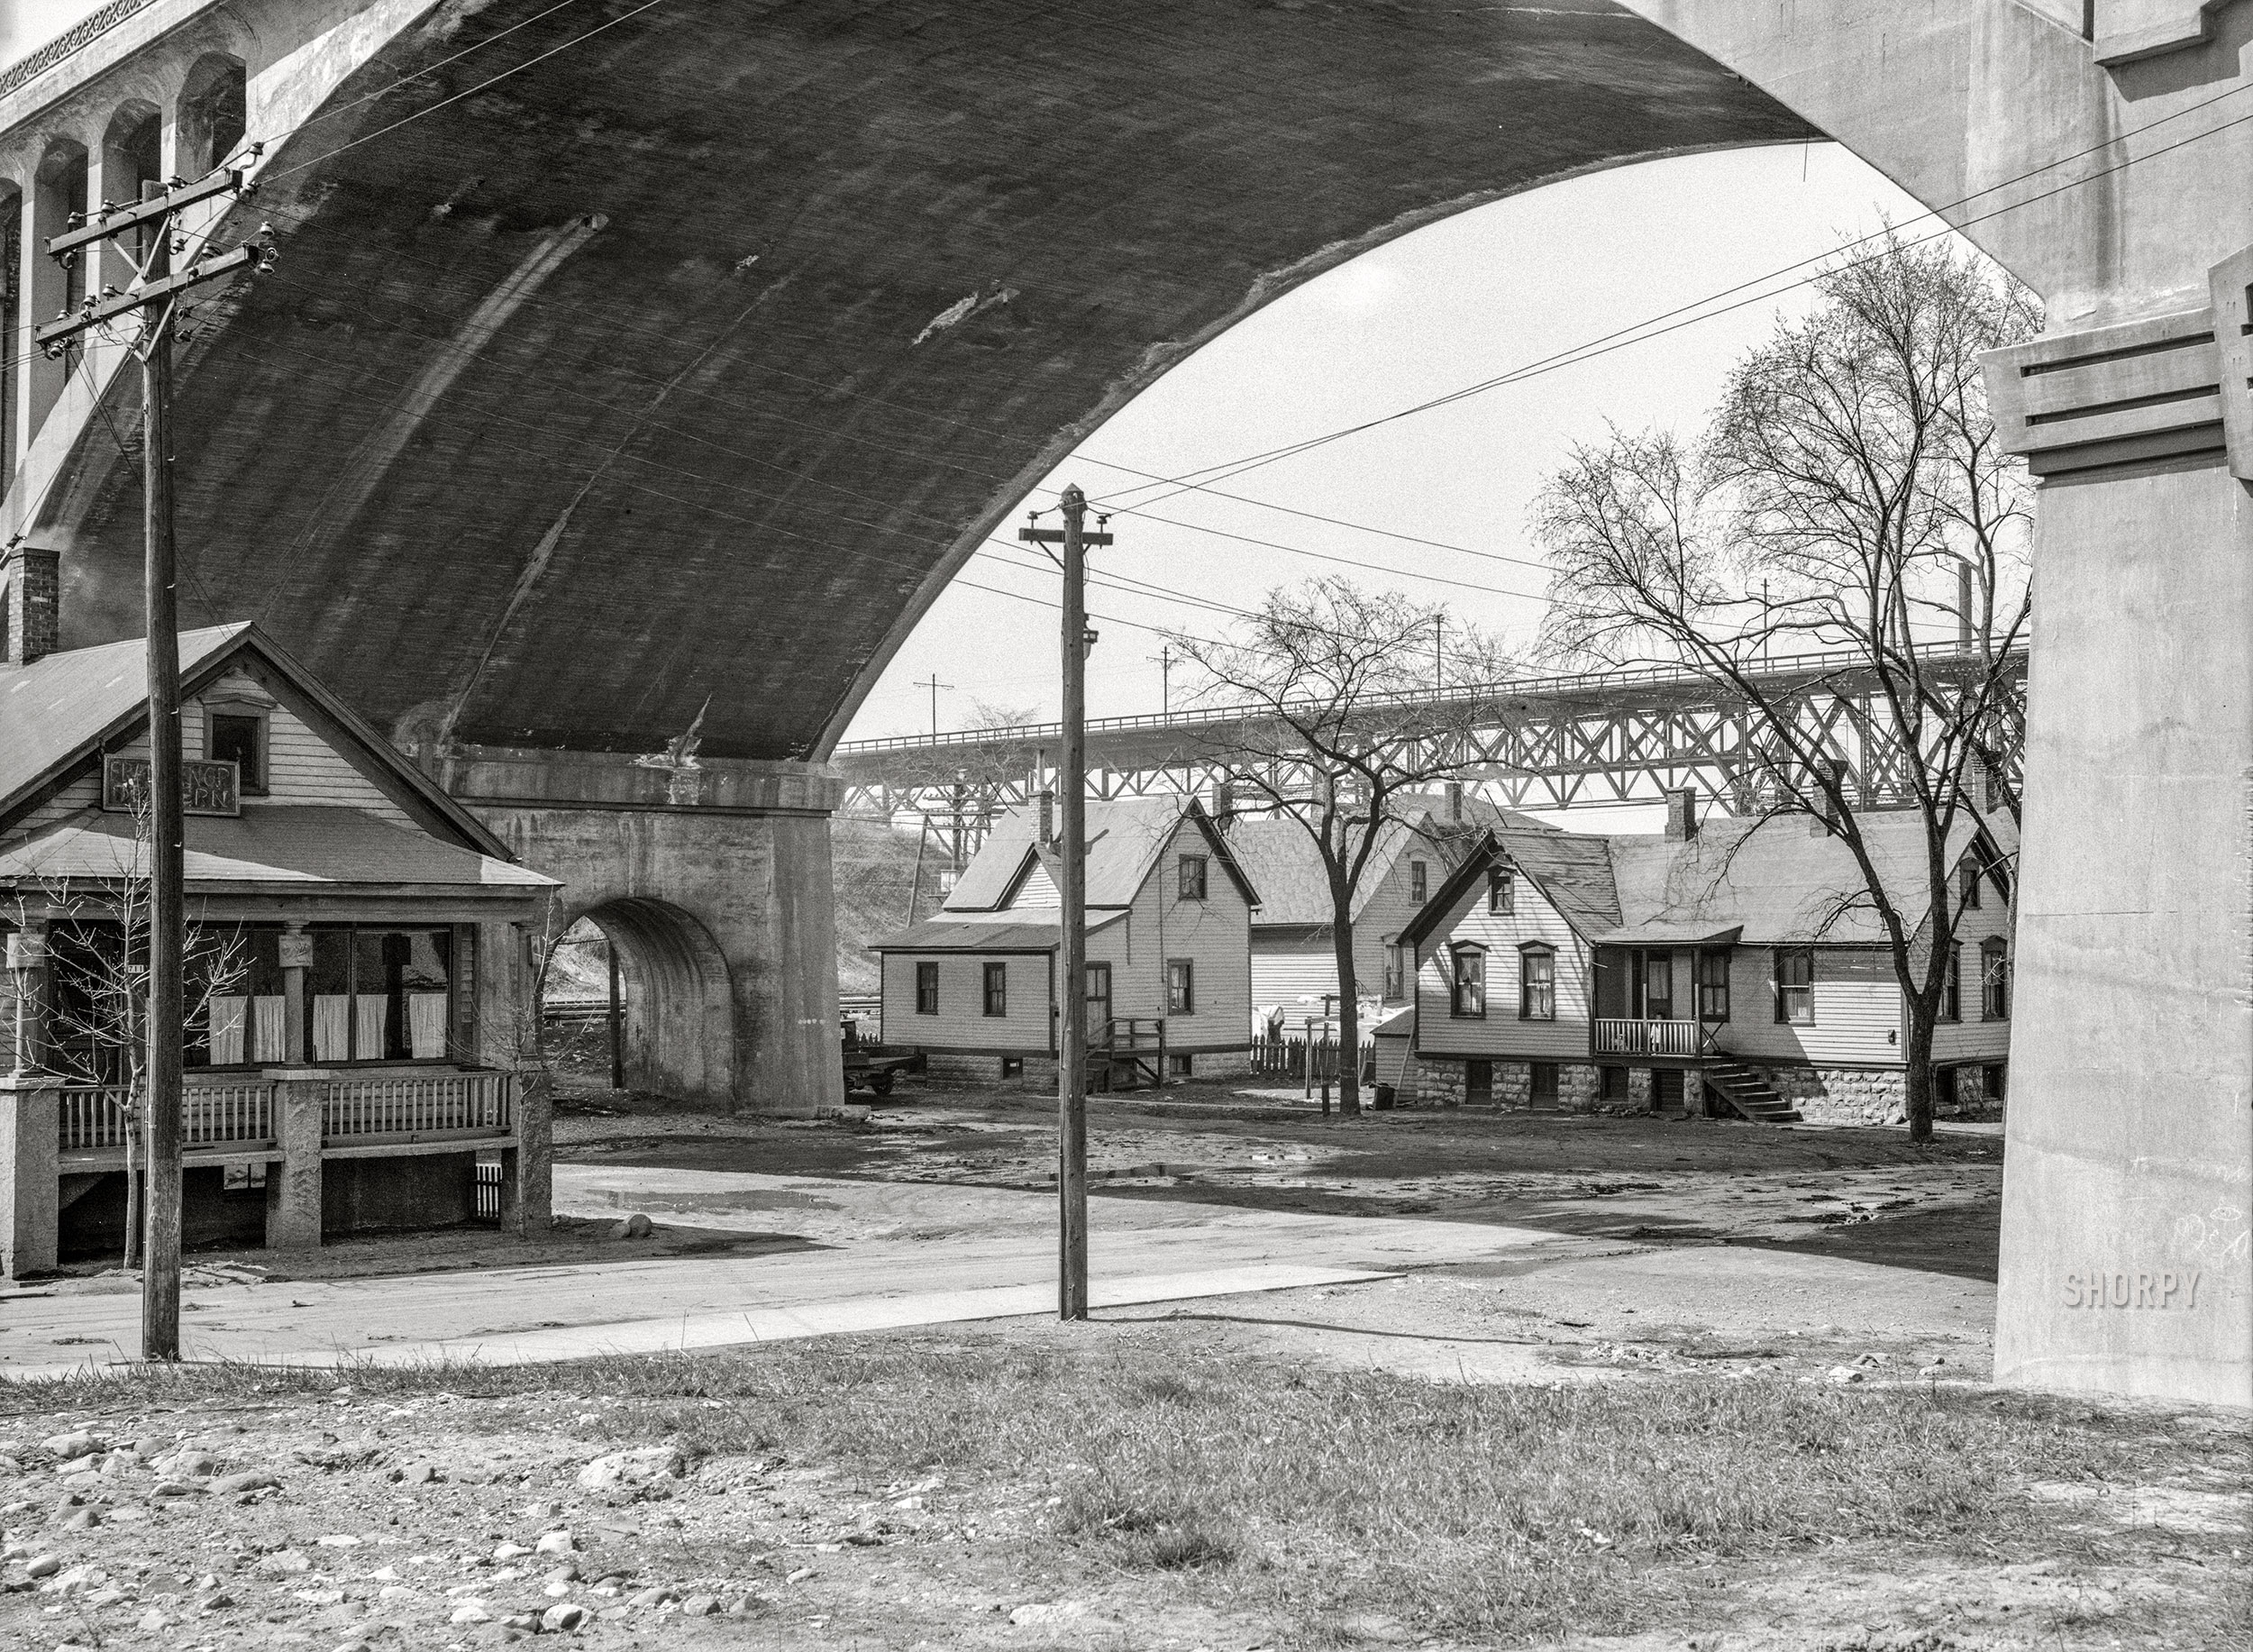 April 1936. "Housing conditions in crowded parts of Milwaukee. Housing under the Wisconsin Avenue viaduct." Another look at the F. Knop Tavern, last seen here. Nitrate negative by Carl Mydans for the Resettlement Administration. View full size.